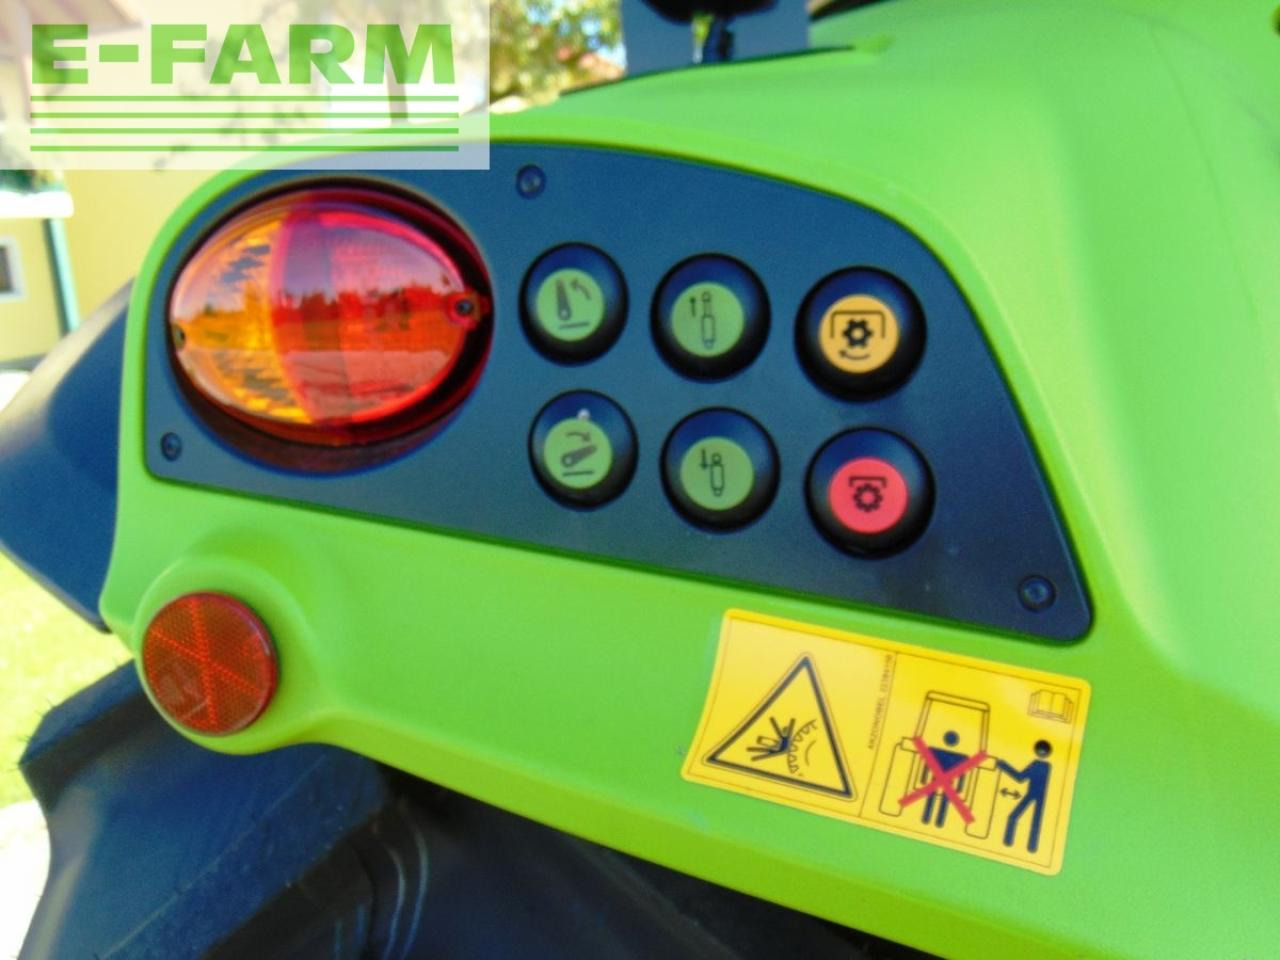 Tractor CLAAS arion 410 stage v (cis)